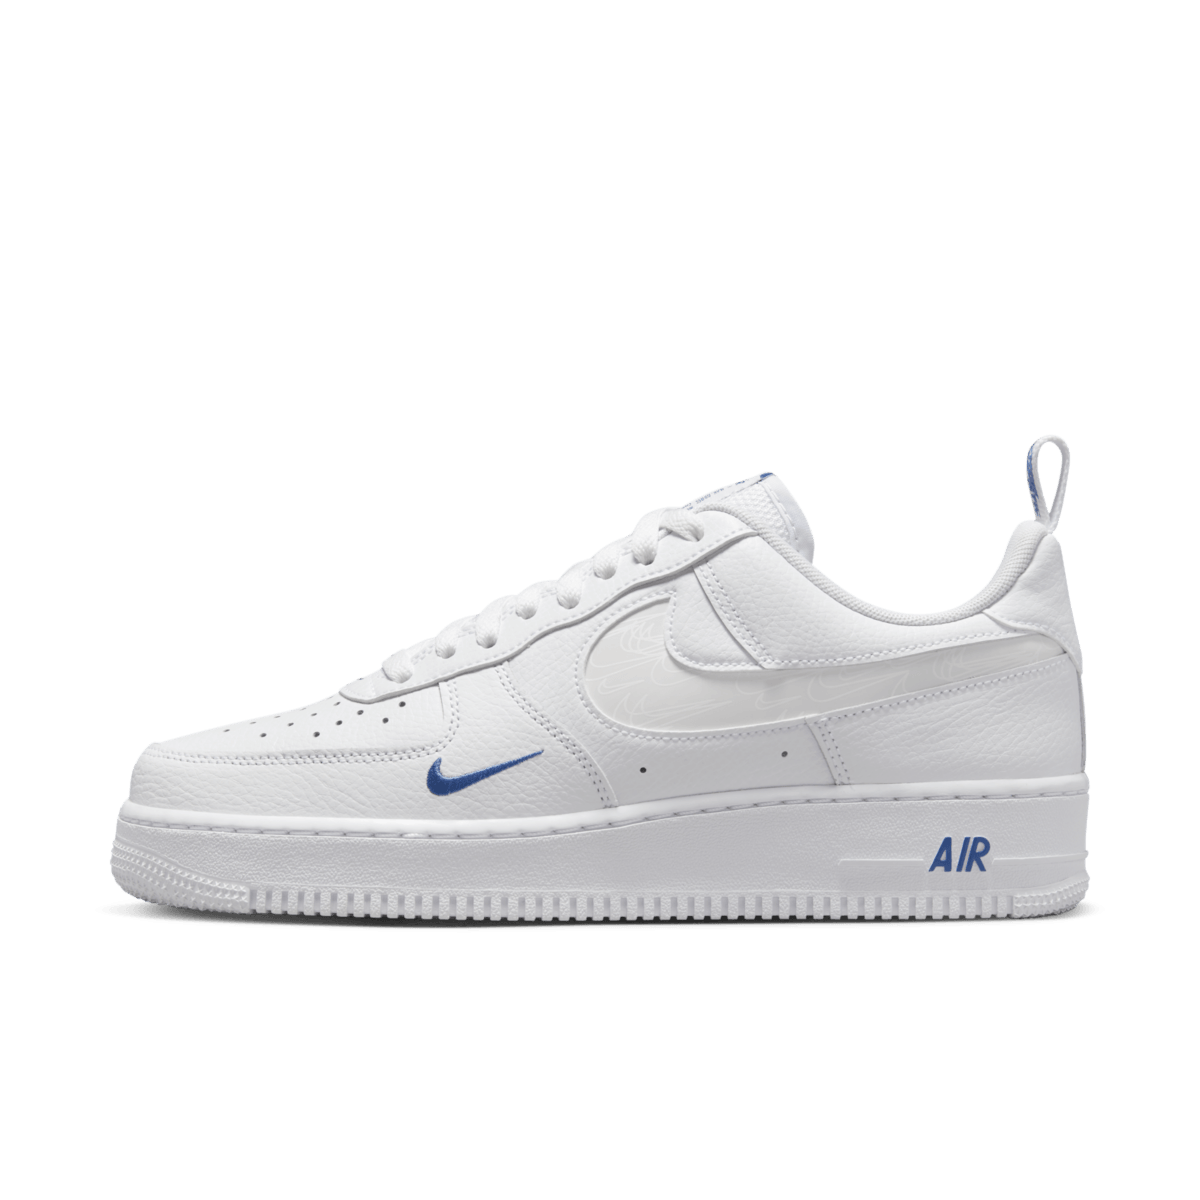 Nike Air Force 1 Low Reflective Swoosh White Blue